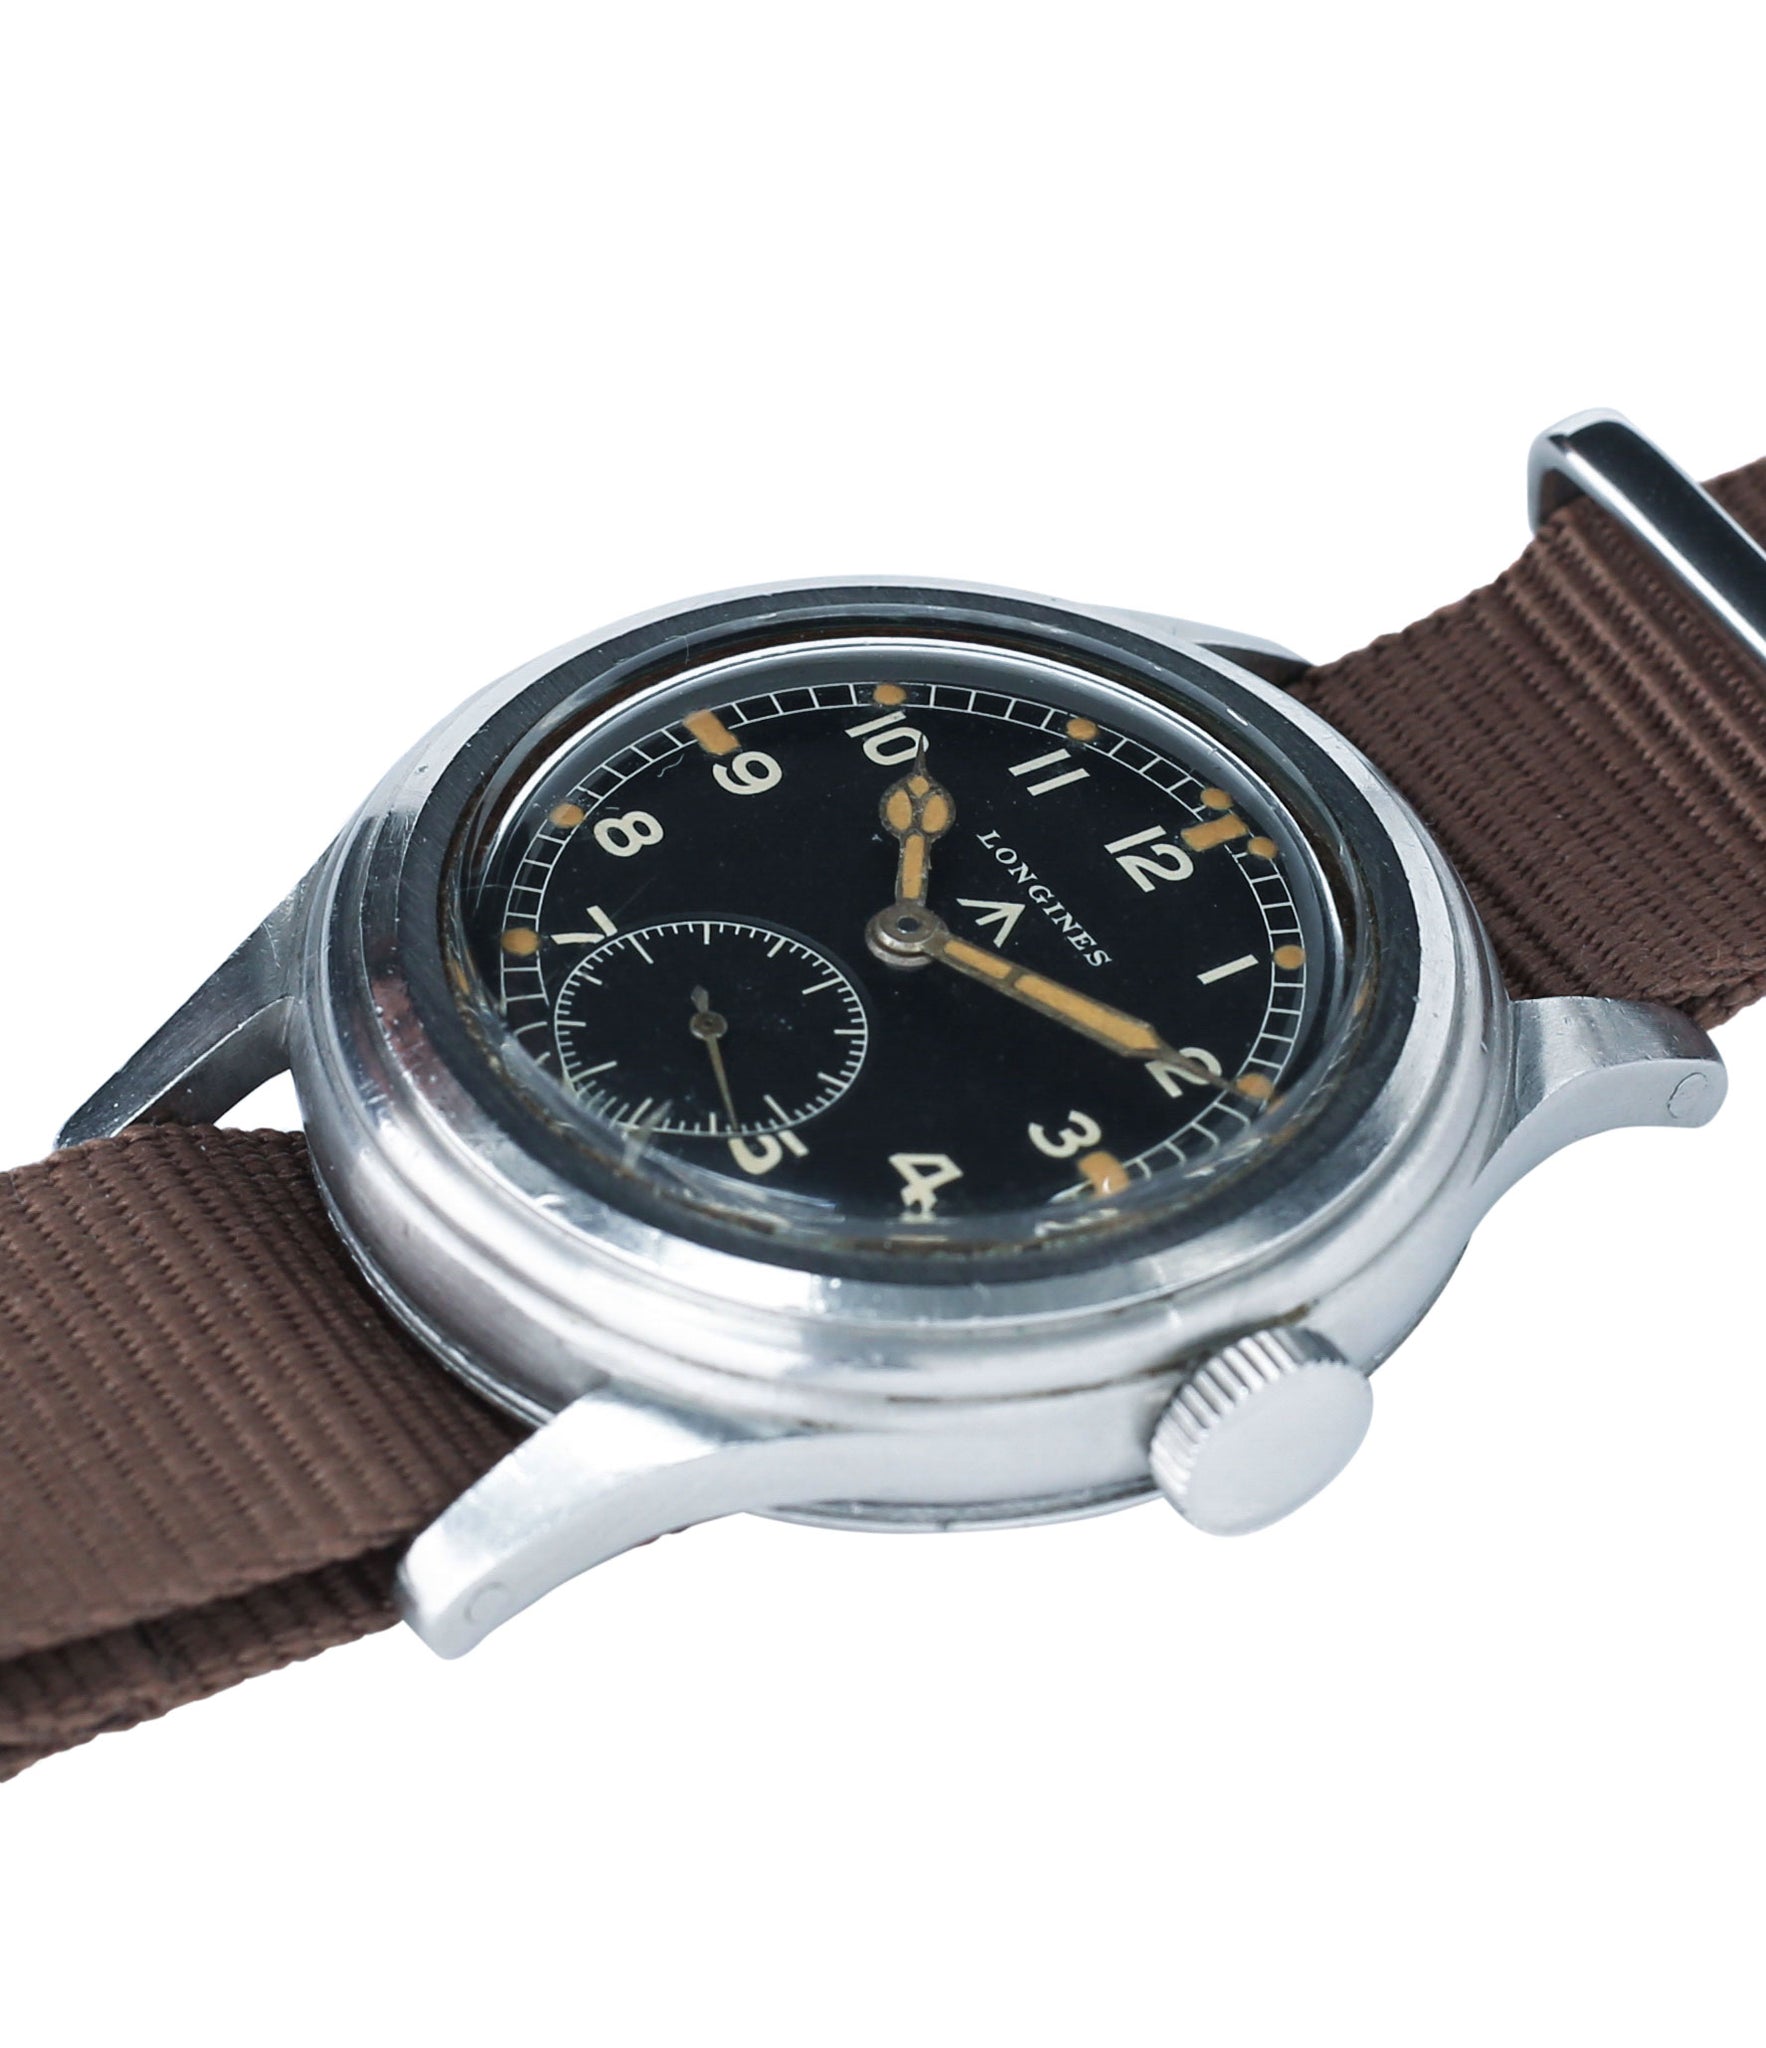 for sale vintage Longines W.W.W. Dirty Dozen British military MoD steel chronometer-graded watch for sale online at A Collected Man London vintage military watch specialist